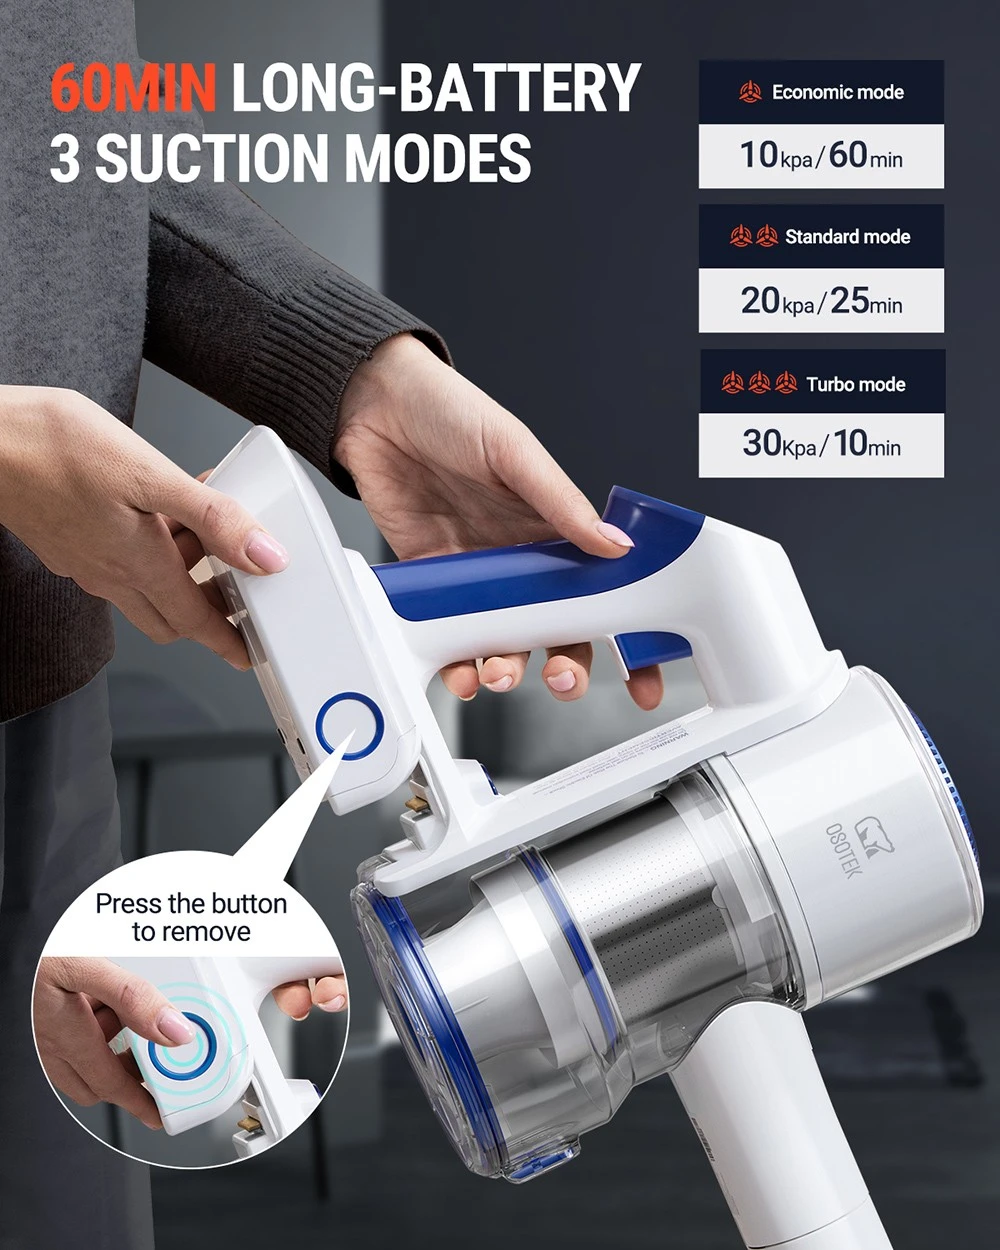 OSOTEK S9 Pro Cordless Handheld Vacuum Cleaner, 30Kpa Suction, 3-gear Speed, 320W High Power, 0.75L Dust Cup, 2500mAh Battery, 60min Runtime